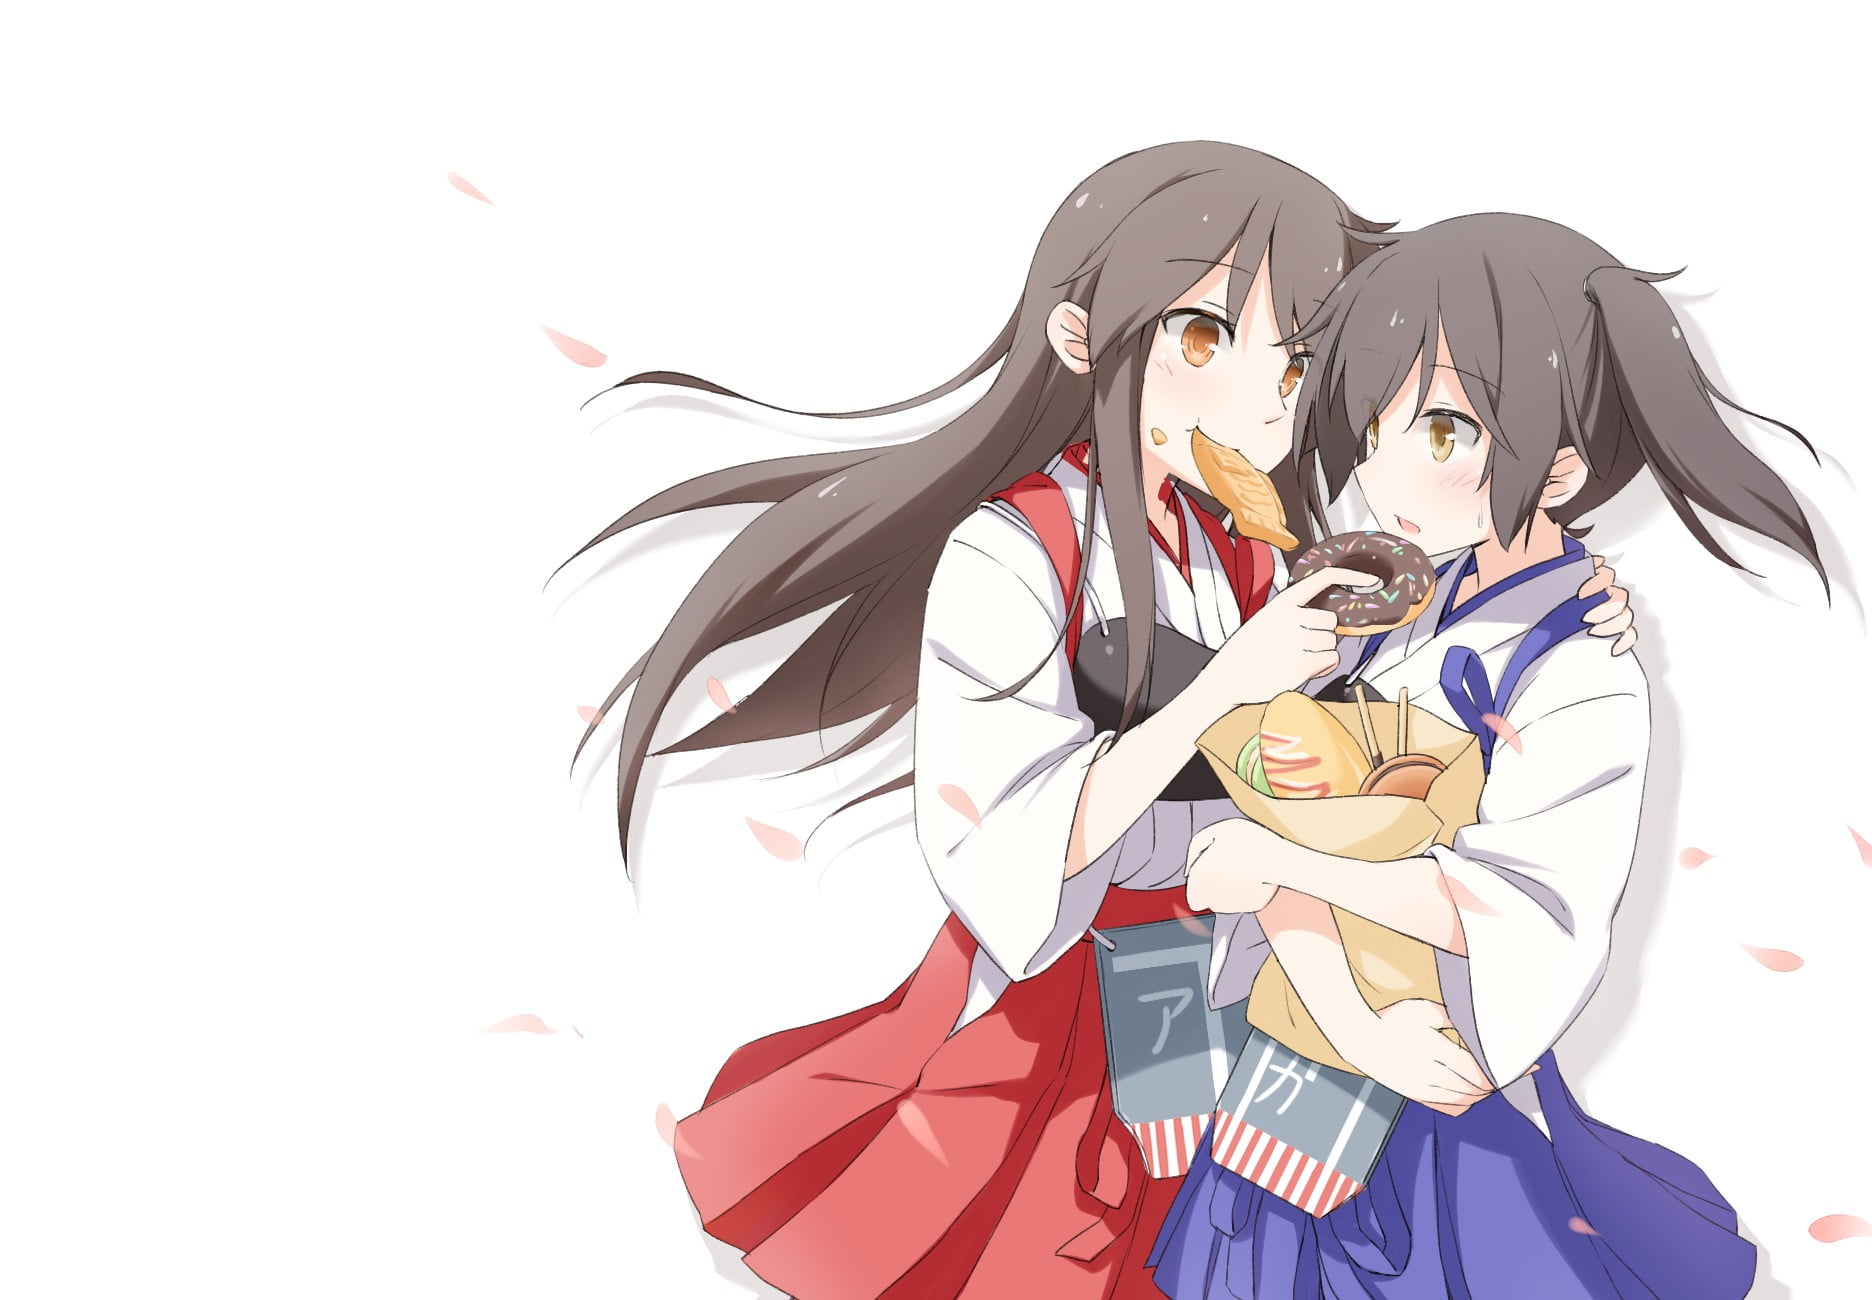 Two Female Anime Characters Eating Doughnut Together Hd Wallpaper Images, Photos, Reviews